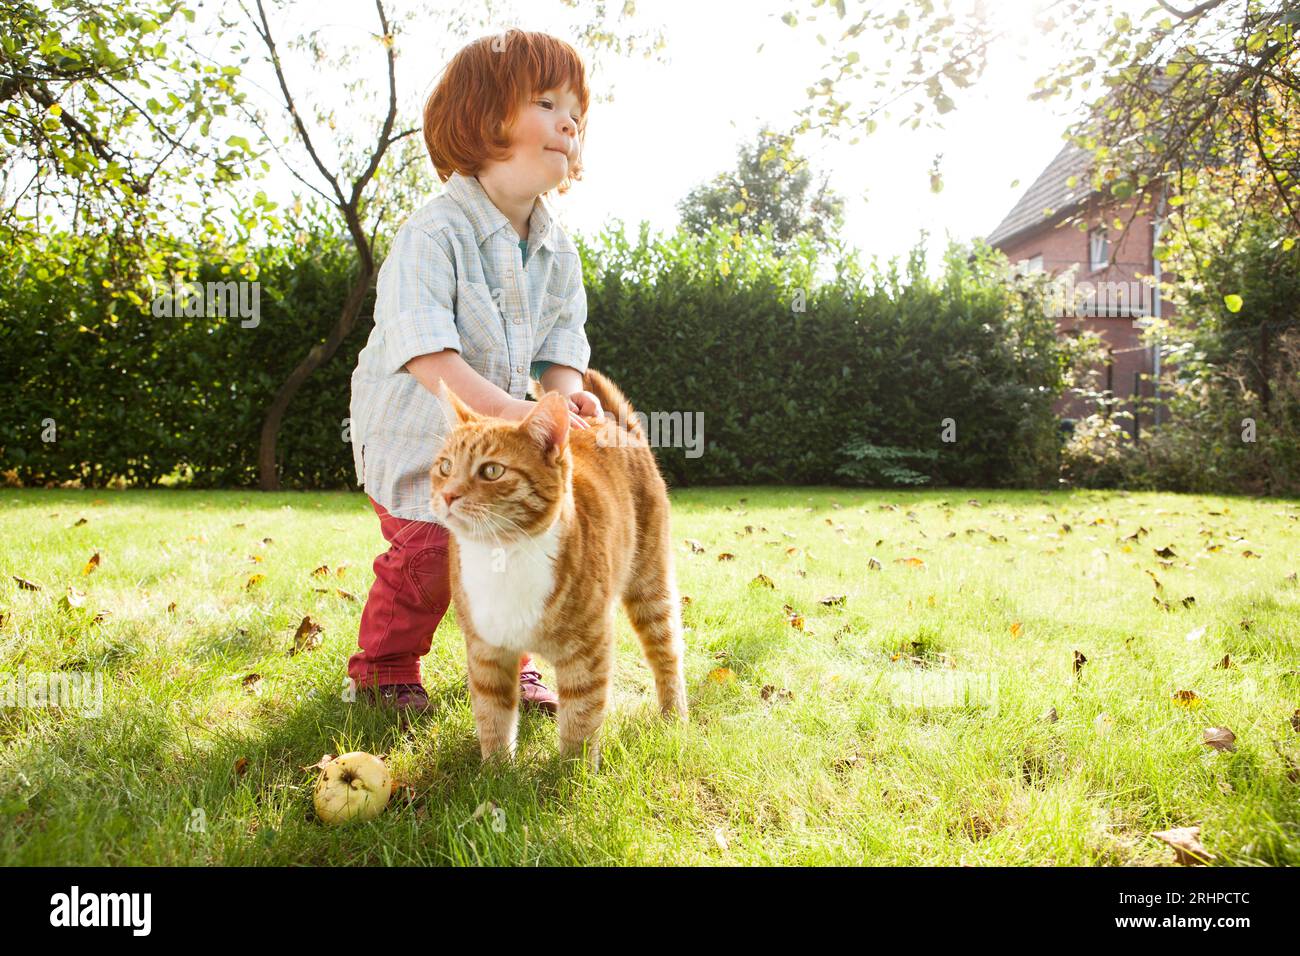 Child with cat Stock Photo